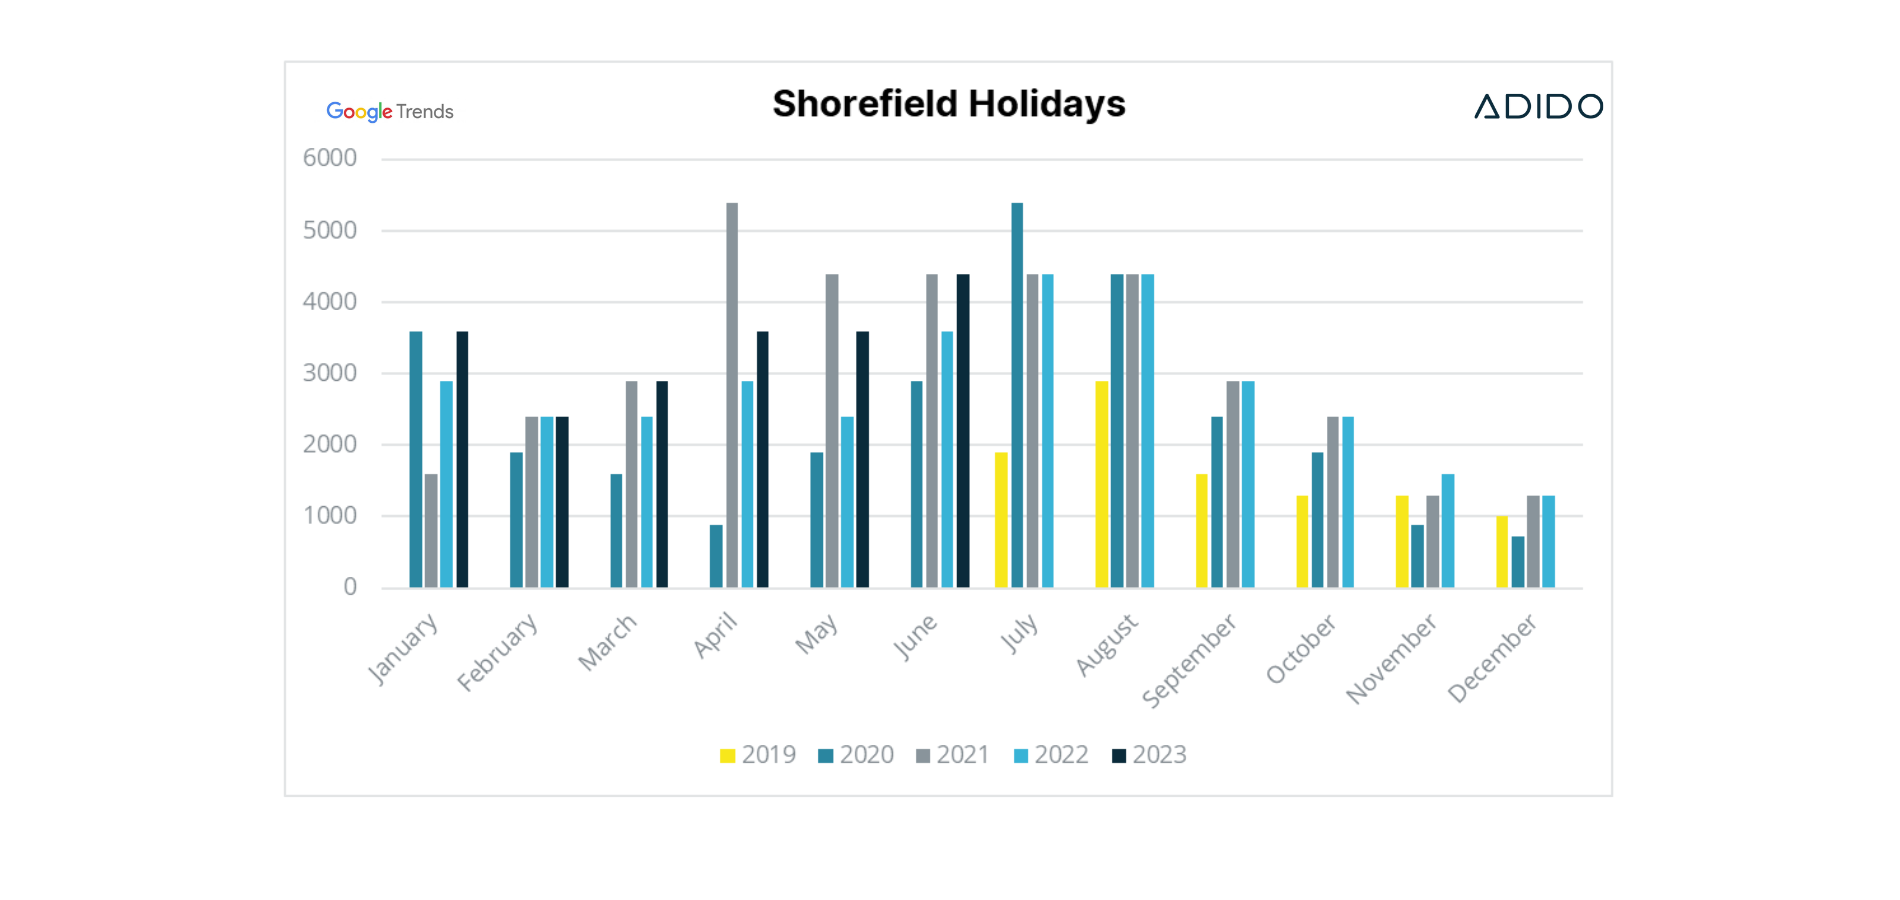 Shorefield holidays search volume